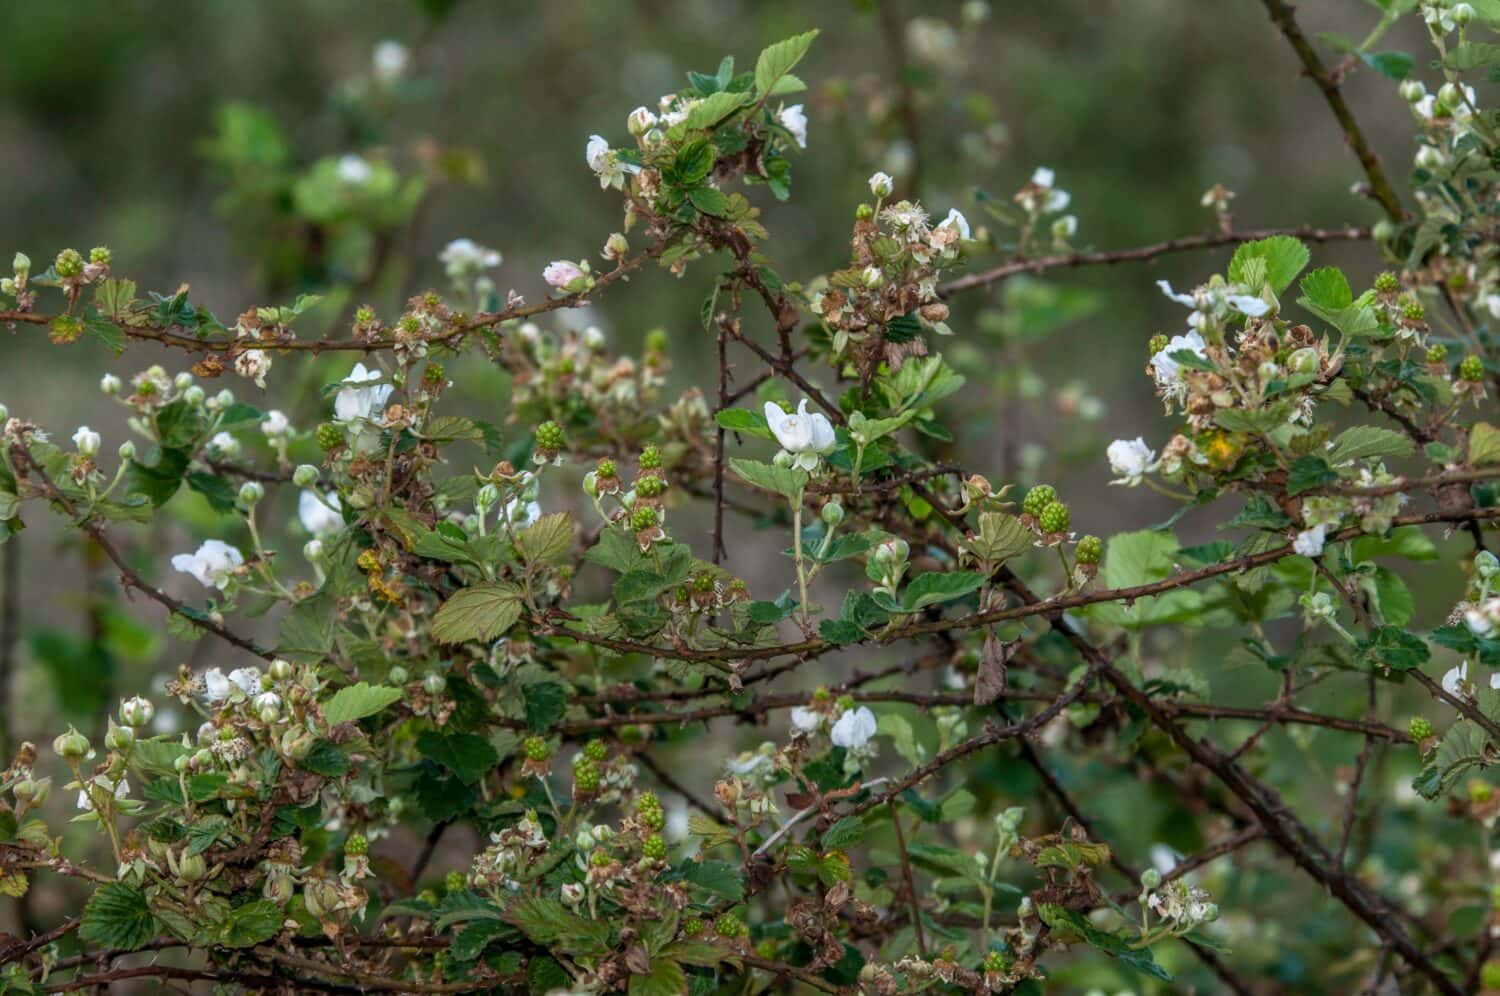 Rubus trivialis, Southern dewberry. A view of a thicket of many flowers, green (unripe) fruit, and prickly stems. Horizontal color photo. 